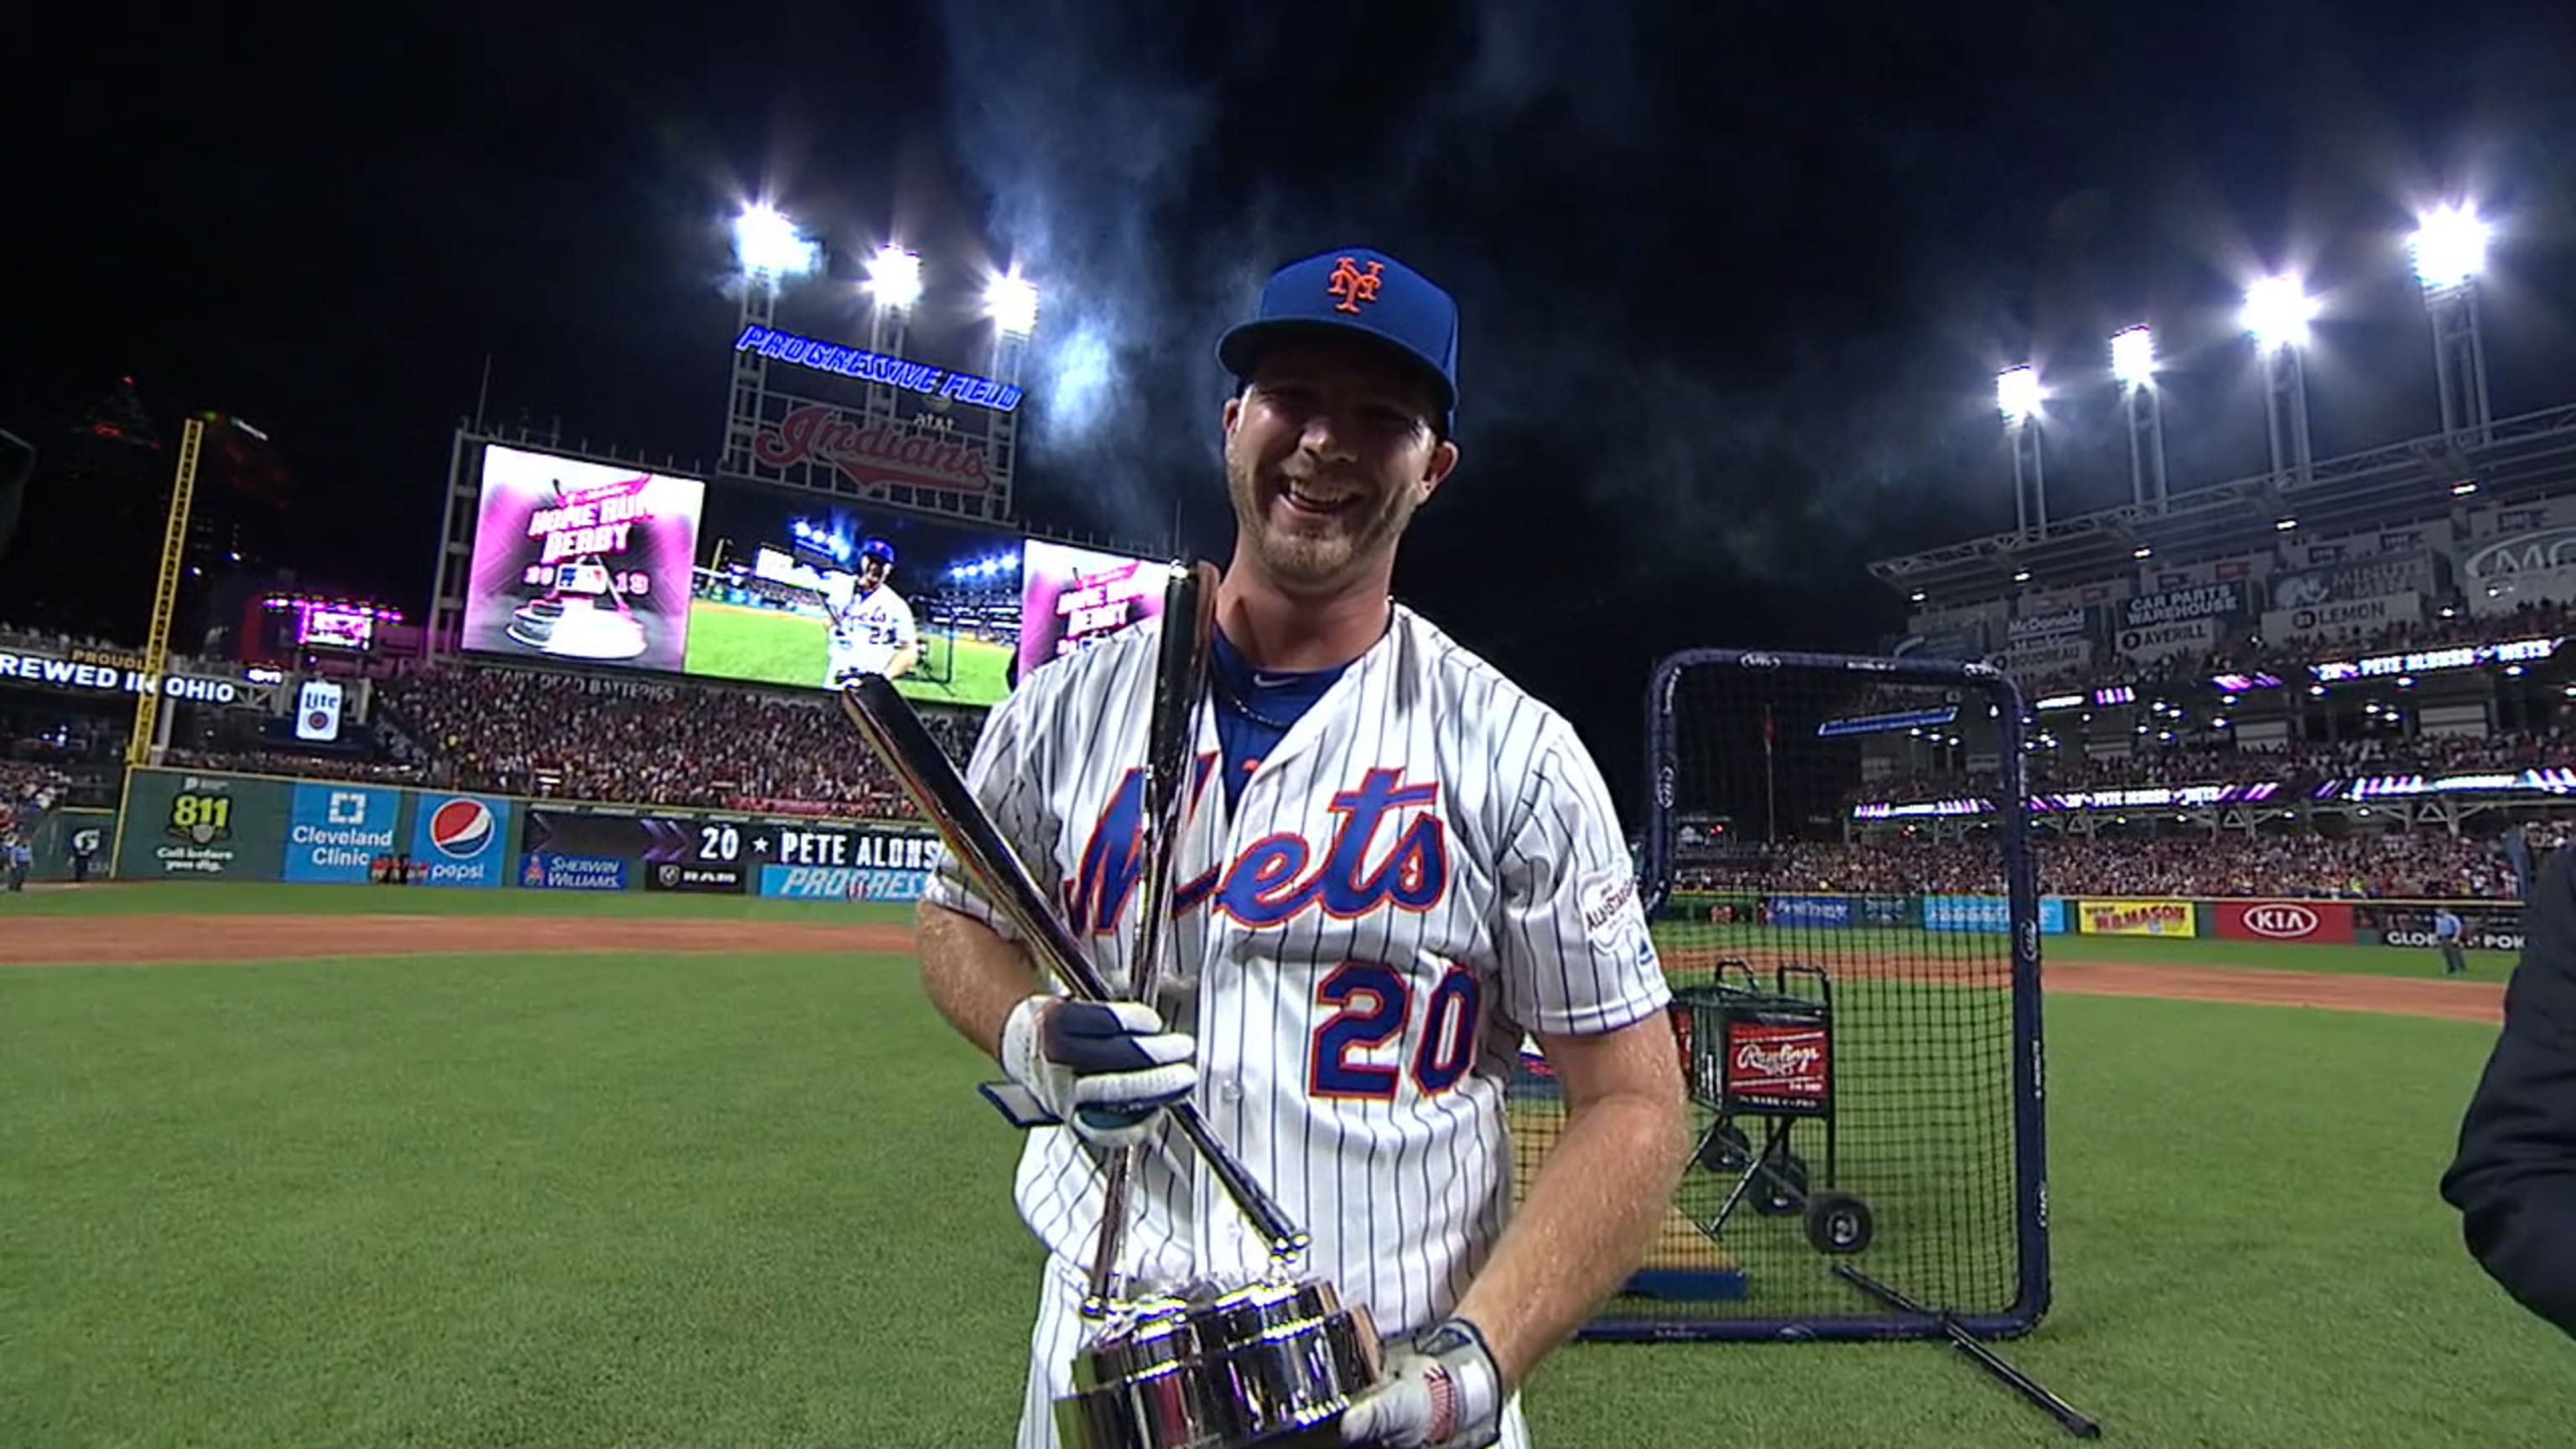 Pete Alonso is the New York Mets' one man party